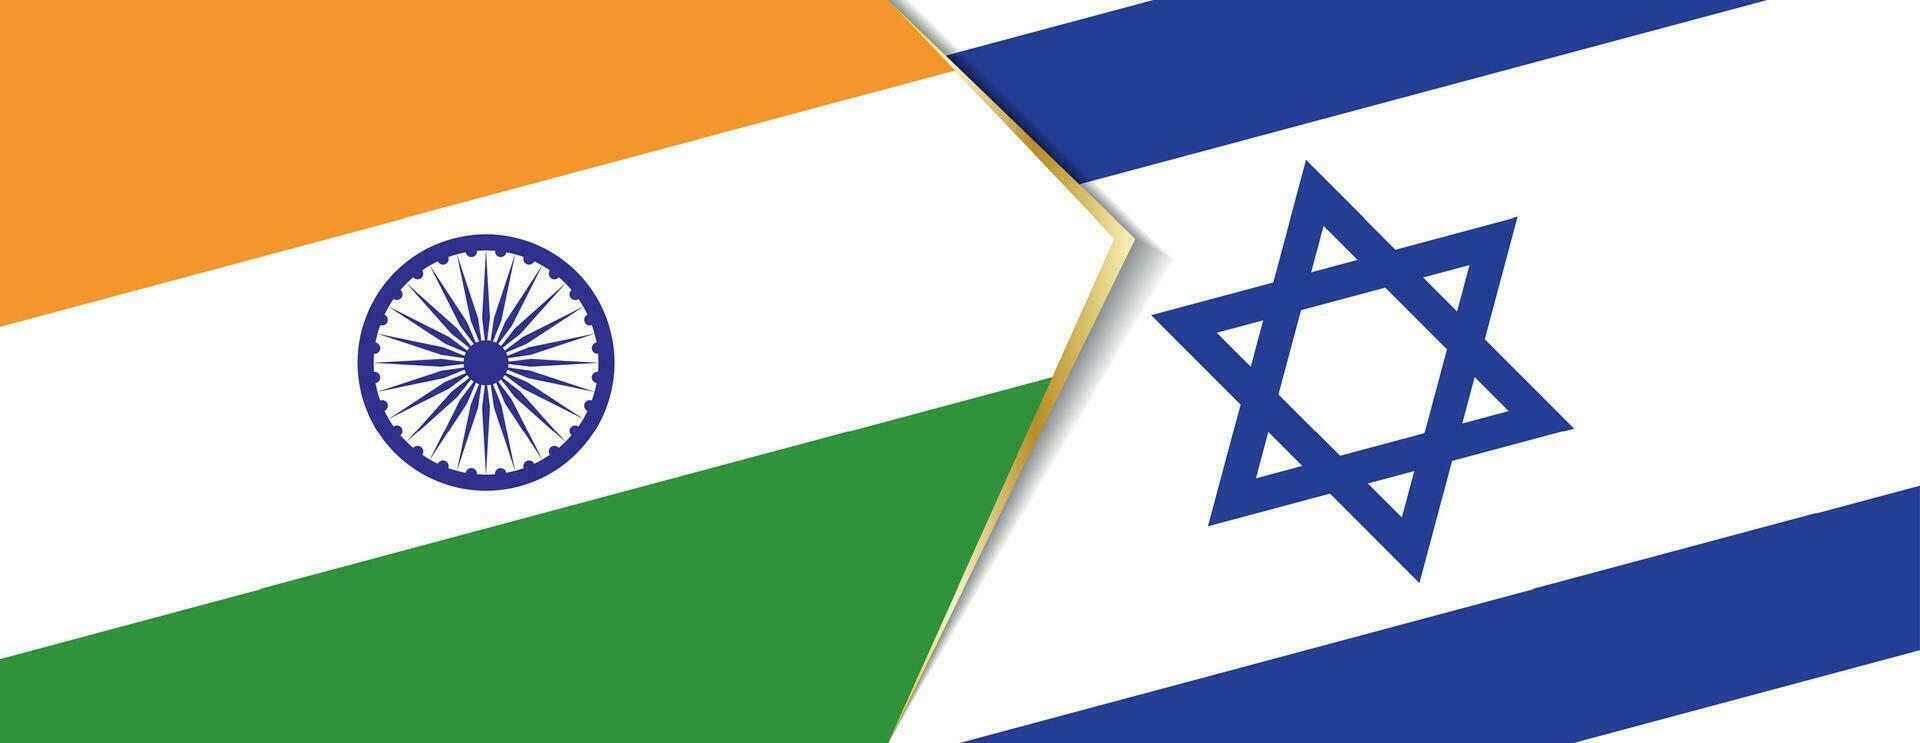 India and Israel flags, two vector flags.